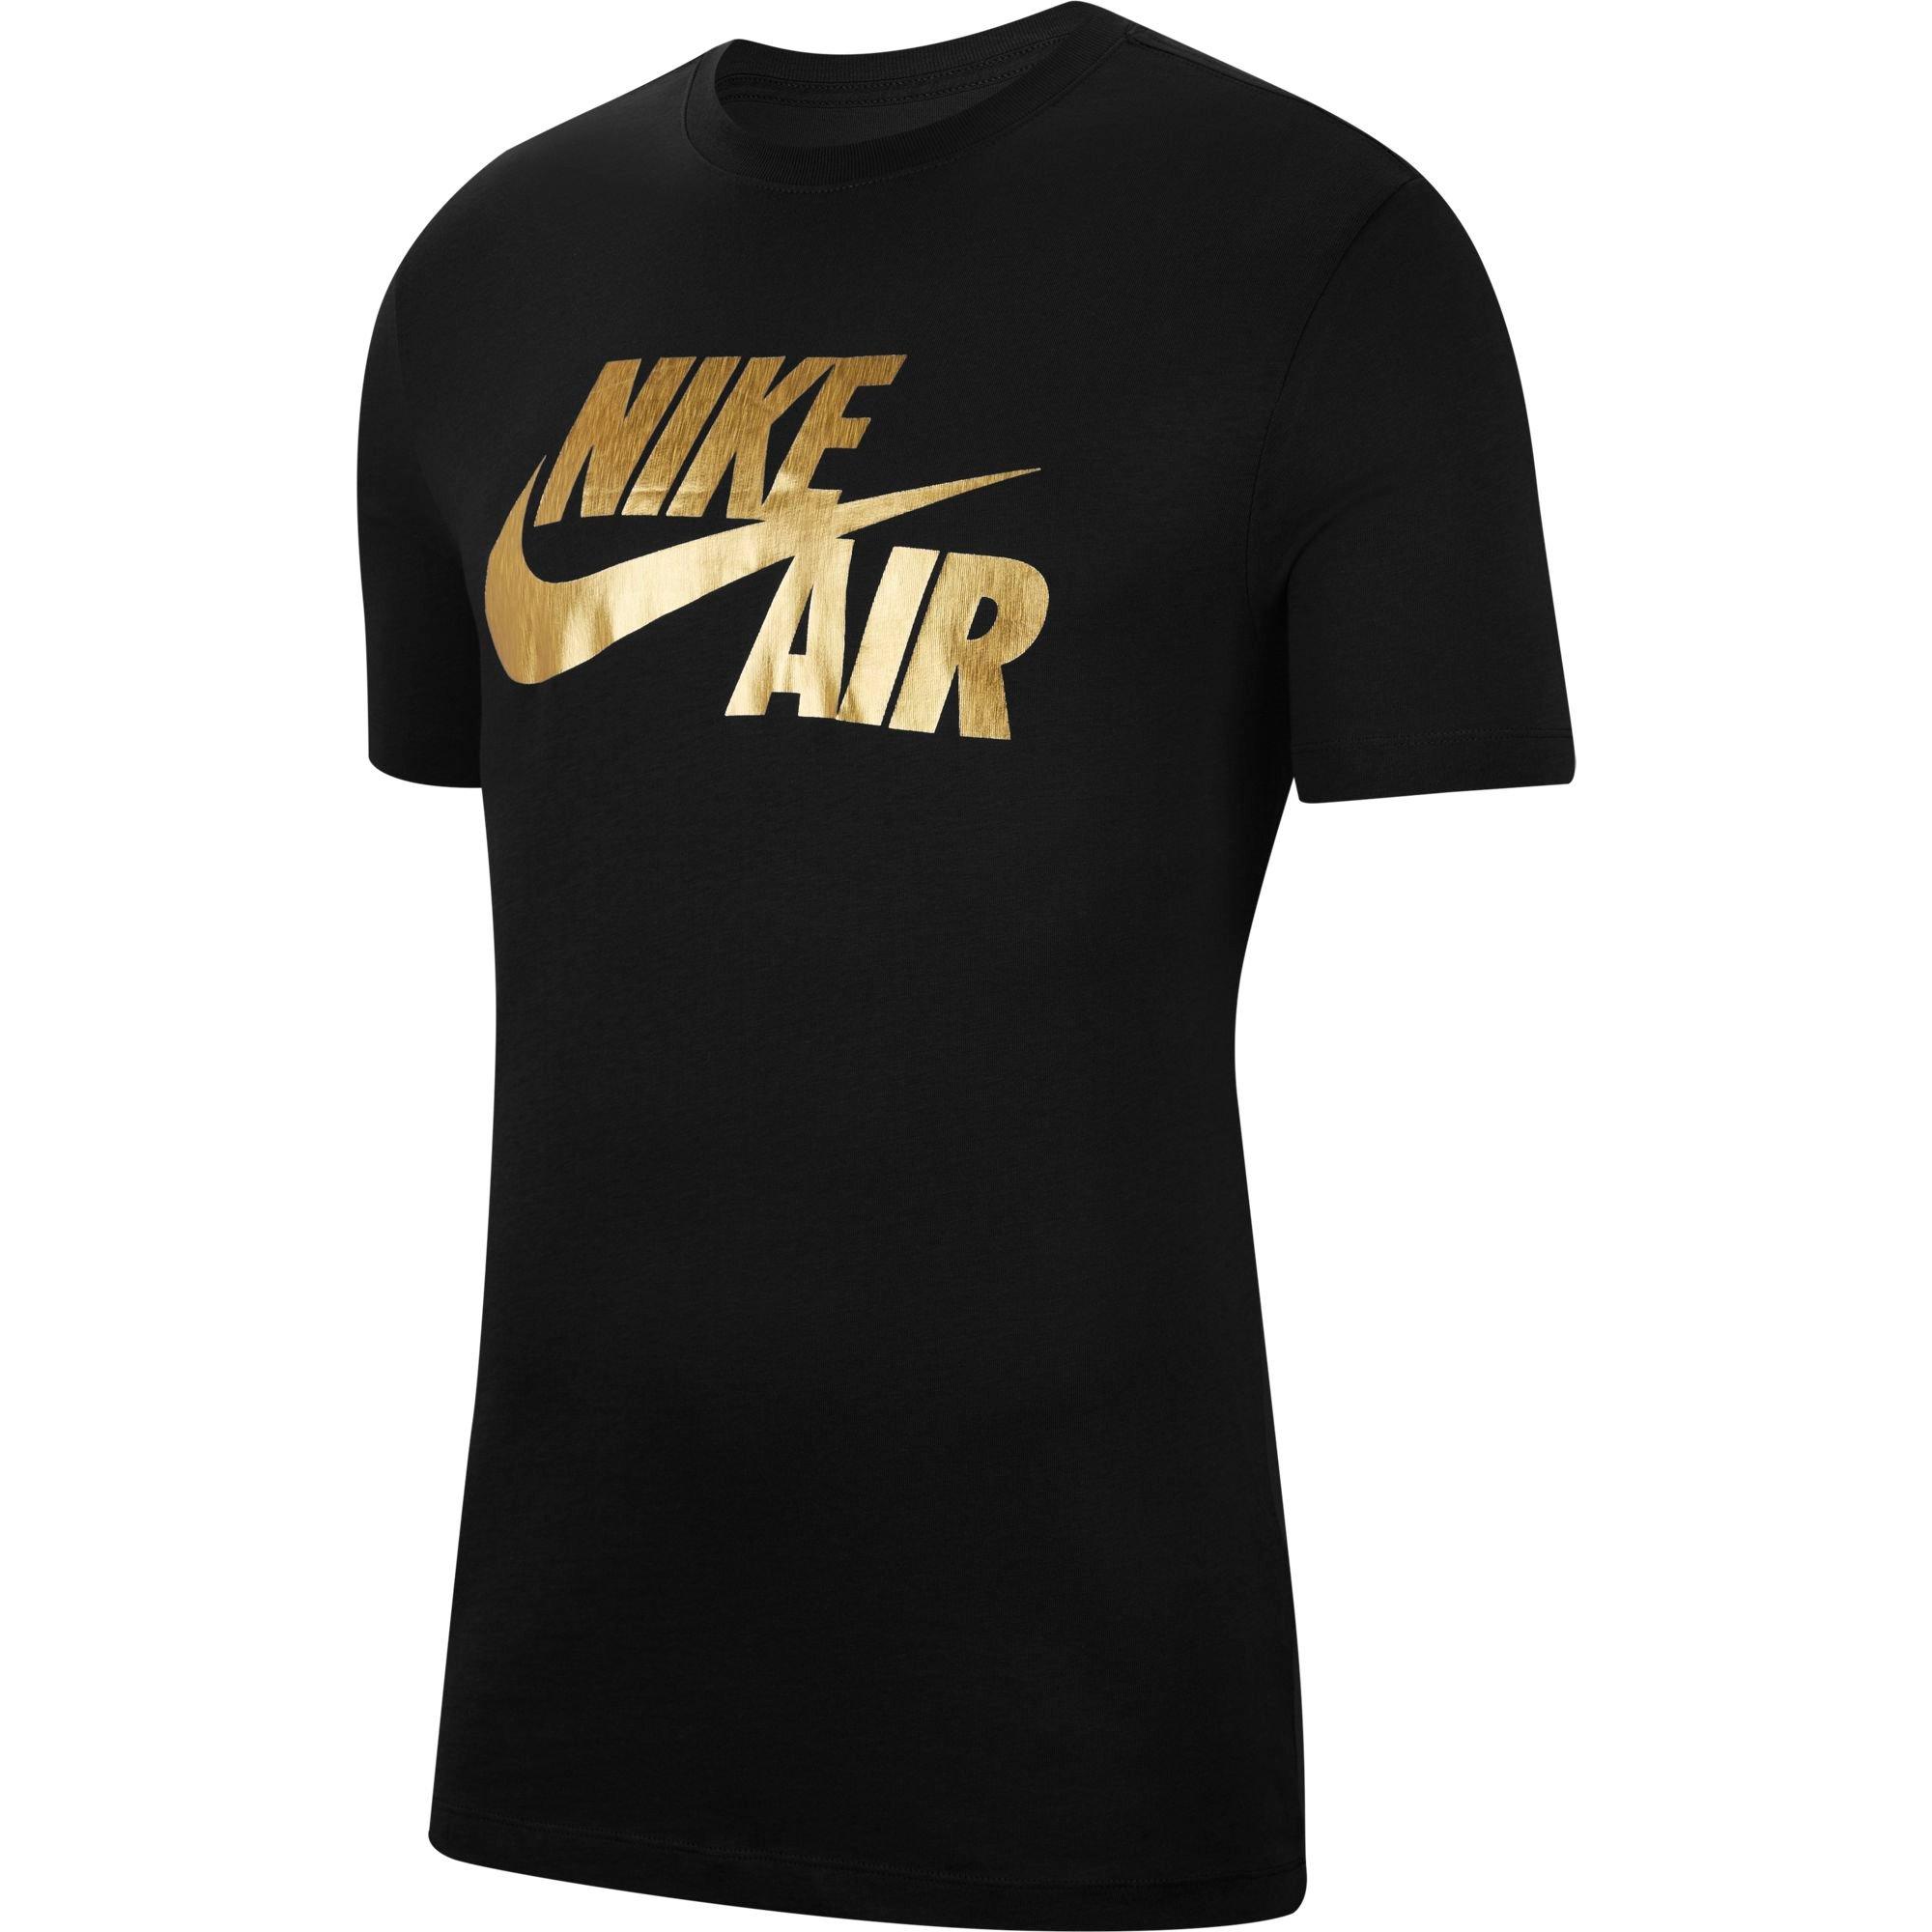 black and gold nike top